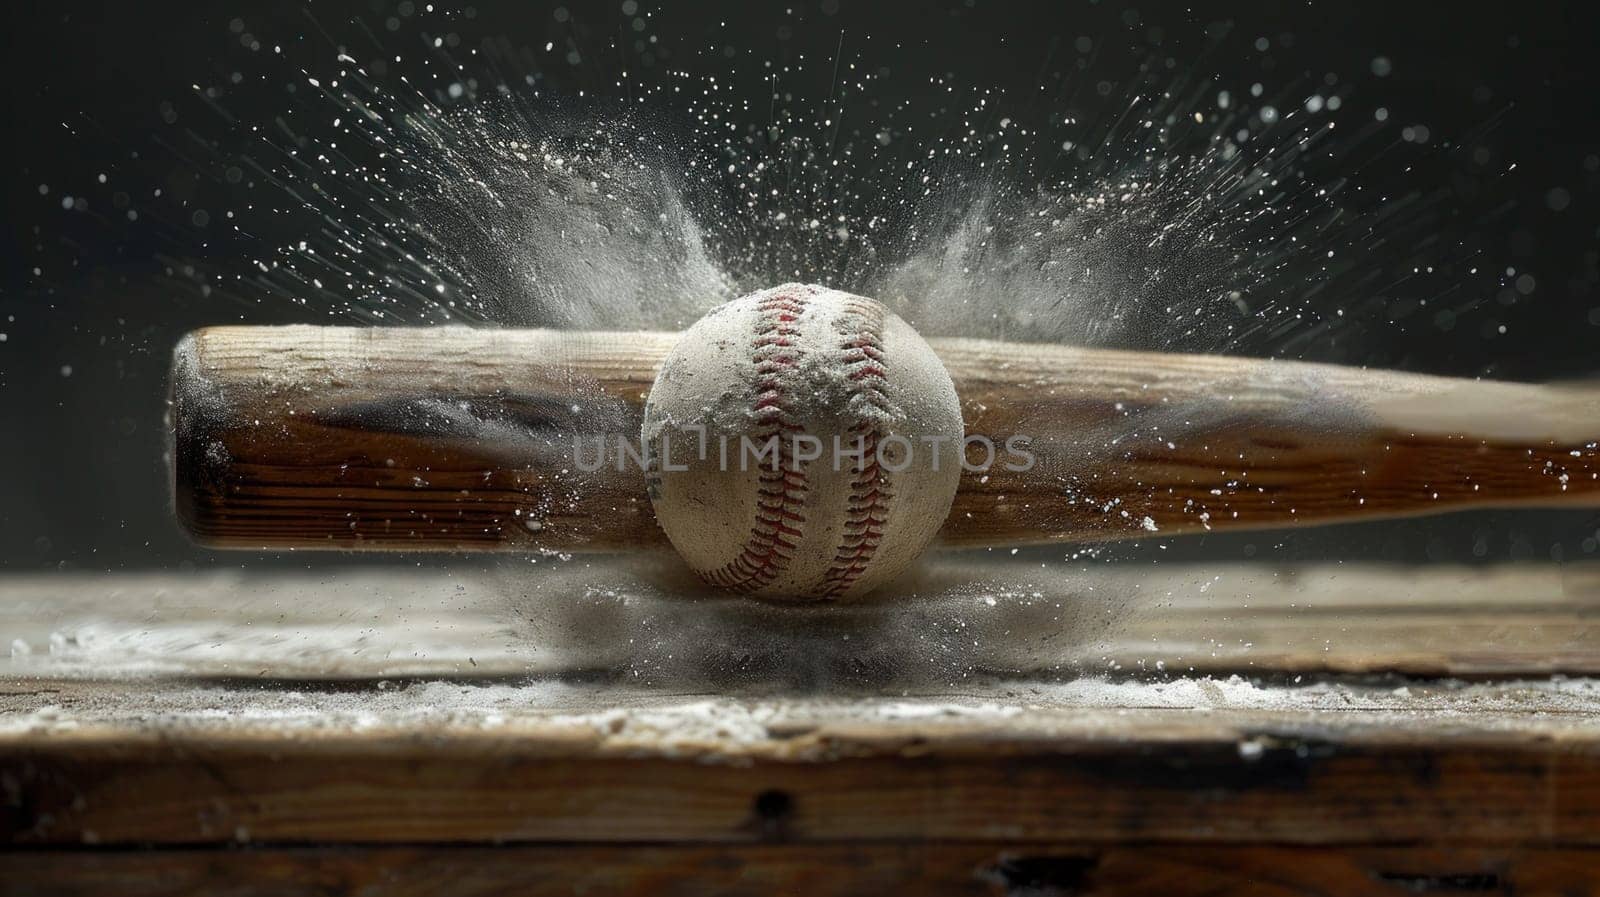 A baseball soaring through the air as it is struck by a baseball bat, capturing the precise moment of impact and energy transfer.